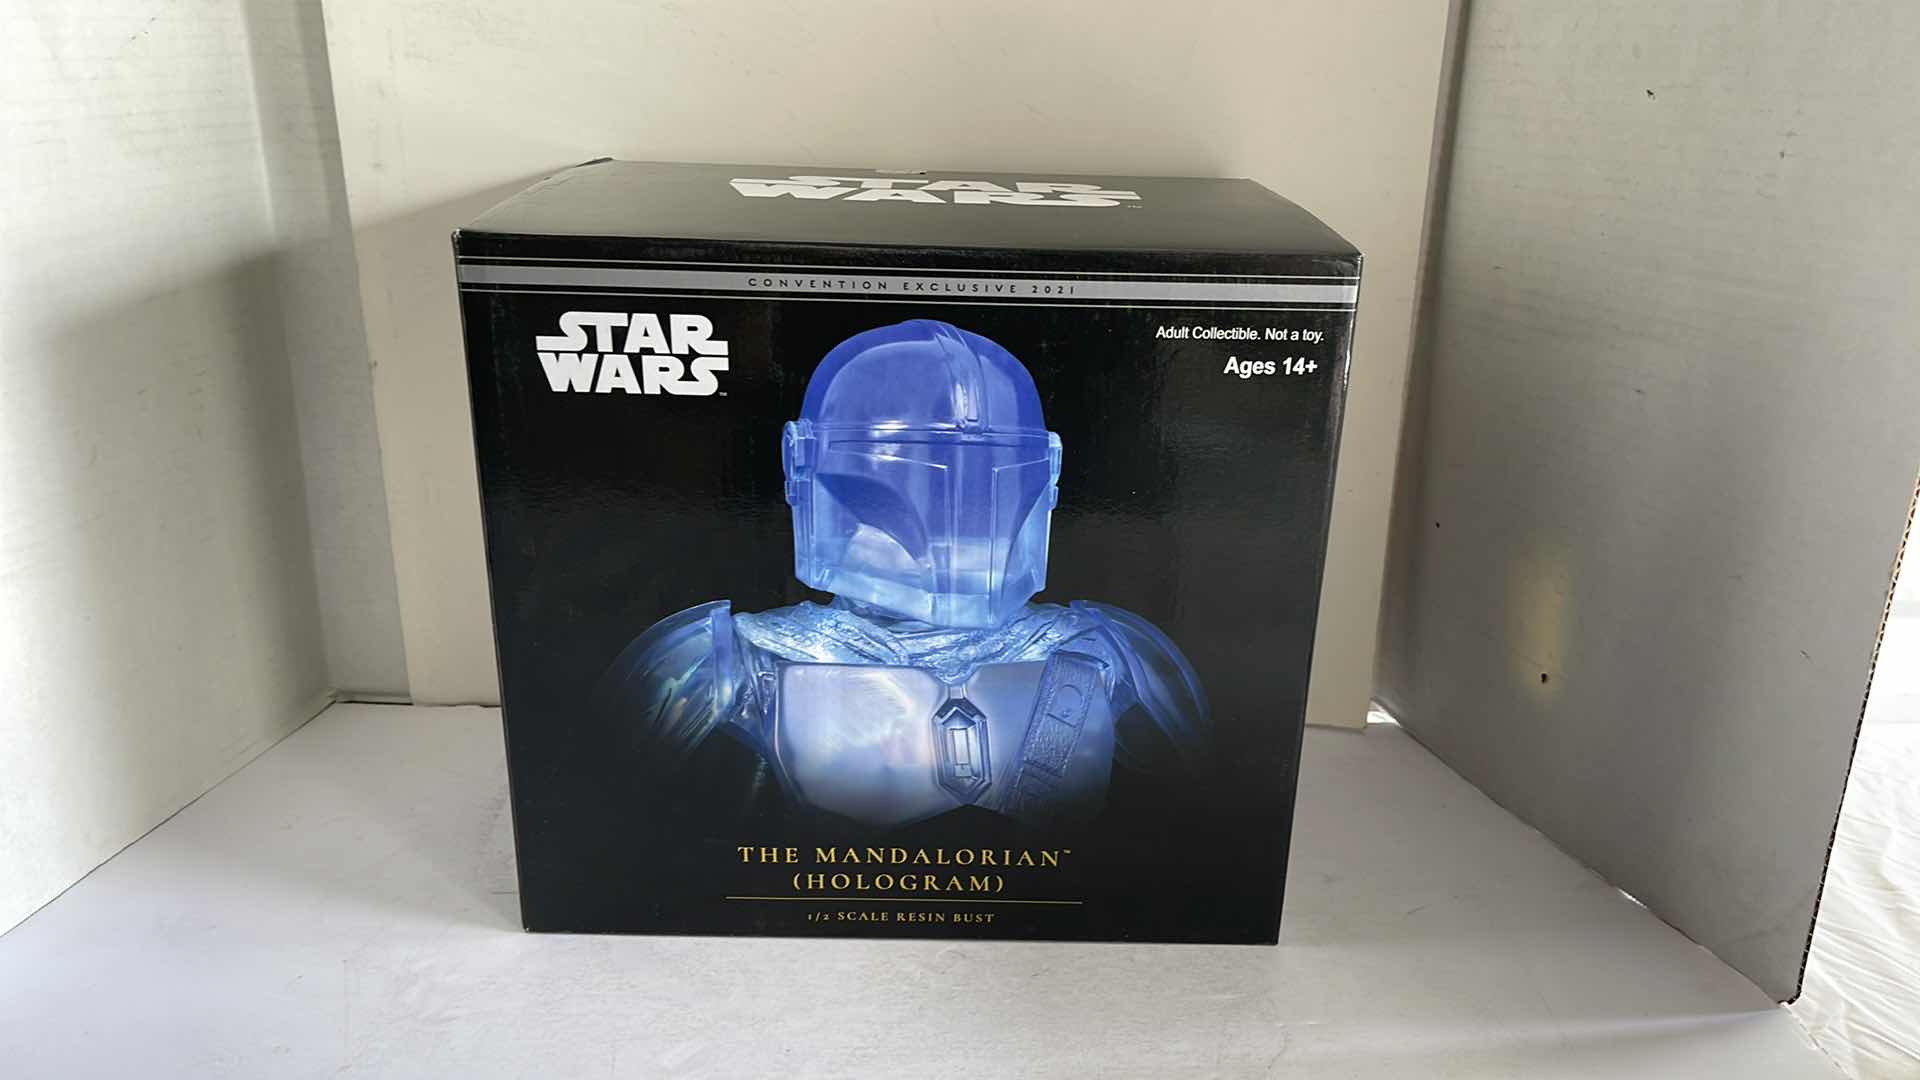 Photo 1 of NIB STAR WARS CONVENTION EXCLUSIVE 2021 THE MANDALORIAN HOLOGRAM RESIN BUST MSRP $199.99